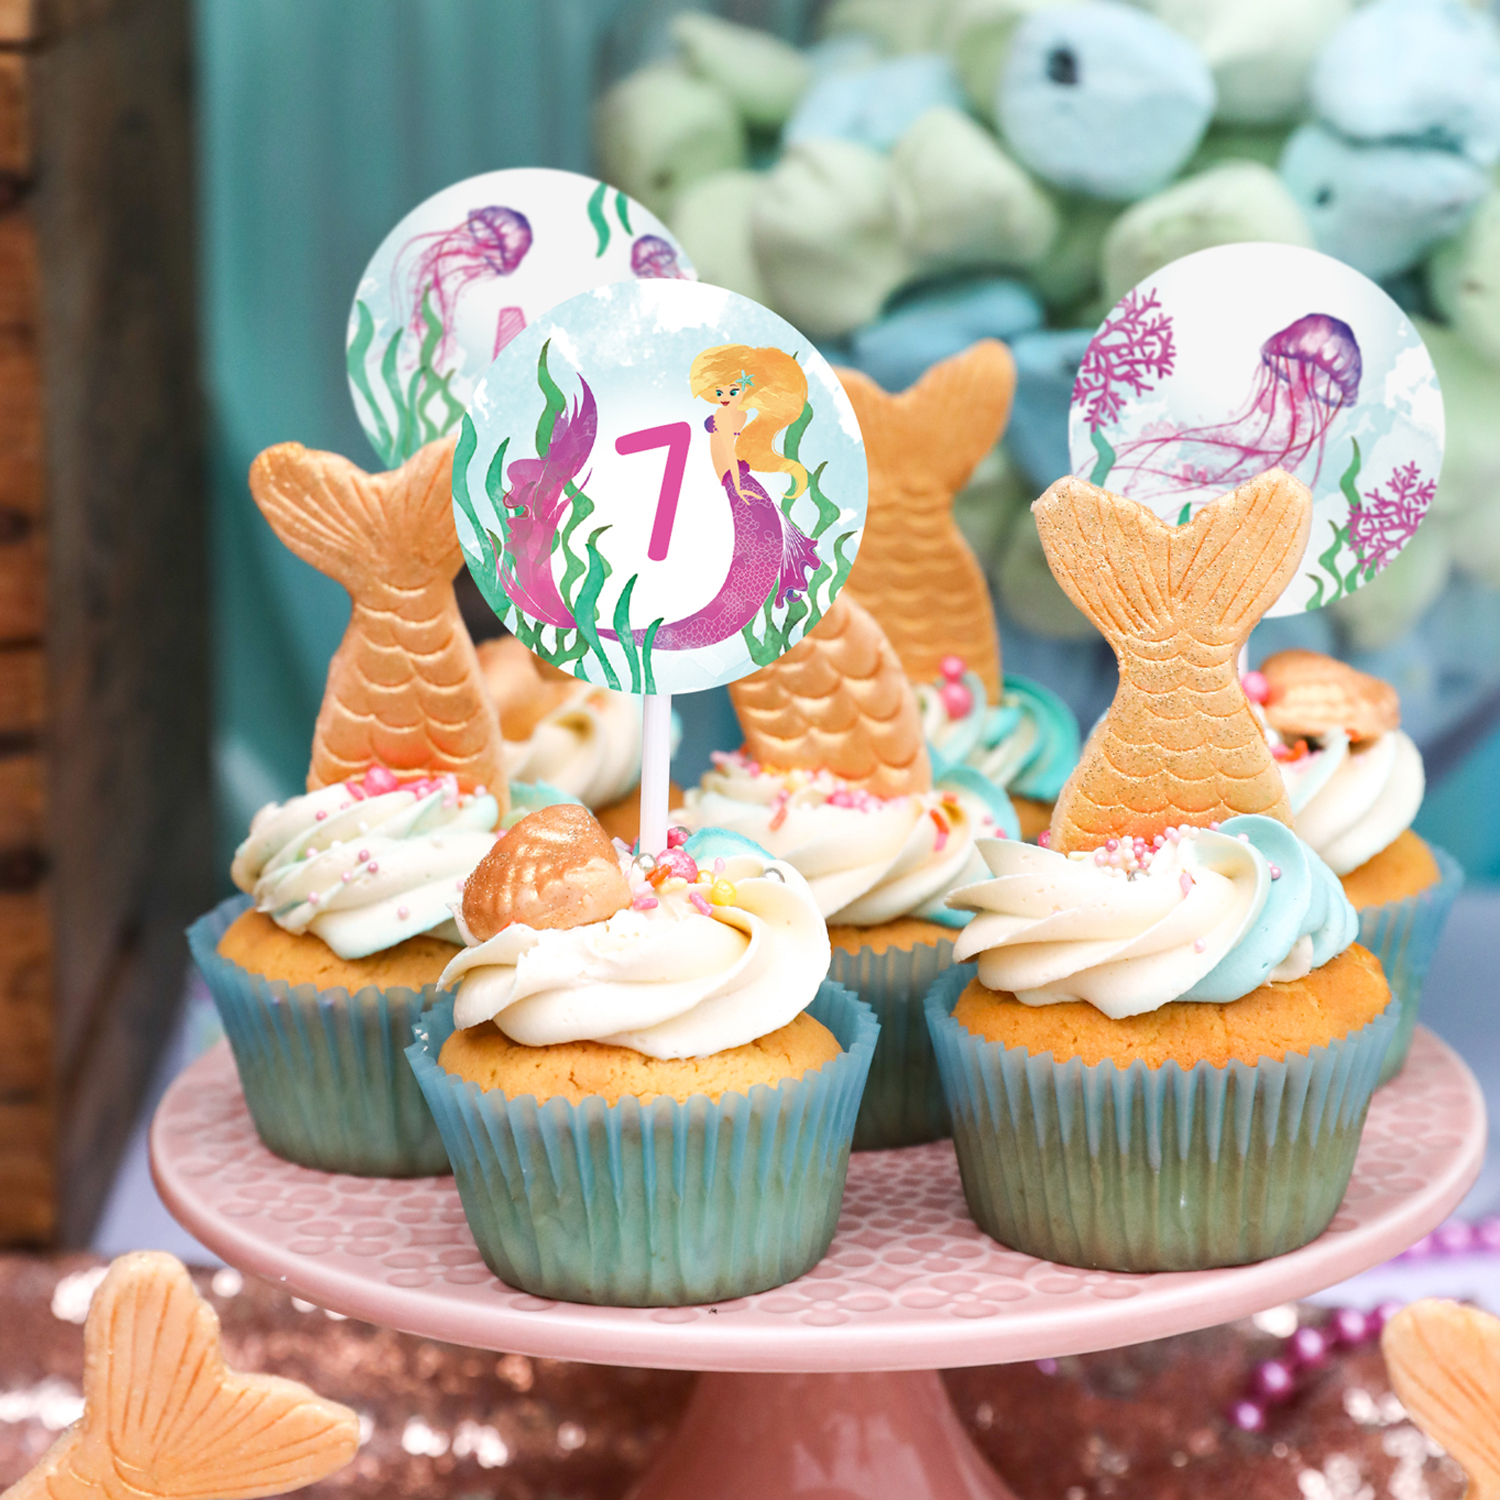 The prettiest pink and teal watercolor Mermaid party set - instant download, edit and print!